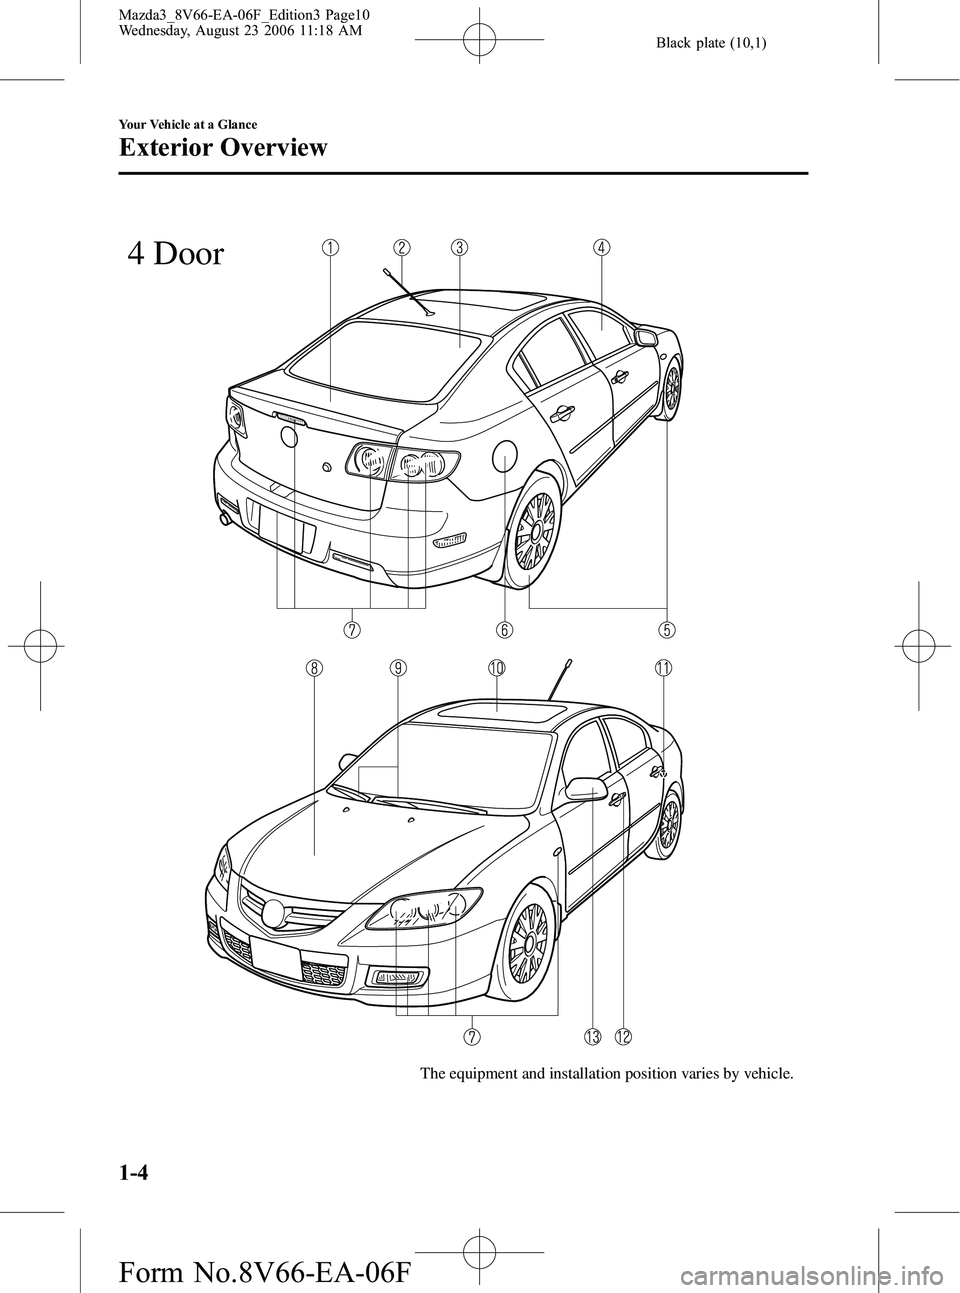 MAZDA MODEL 3 5-DOOR 2007  Owners Manual Black plate (10,1)
The equipment and installation position varies by vehicle.
4 Door
1-4
Your Vehicle at a Glance
Exterior Overview
Mazda3_8V66-EA-06F_Edition3 Page10
Wednesday, August 23 2006 11:18 A